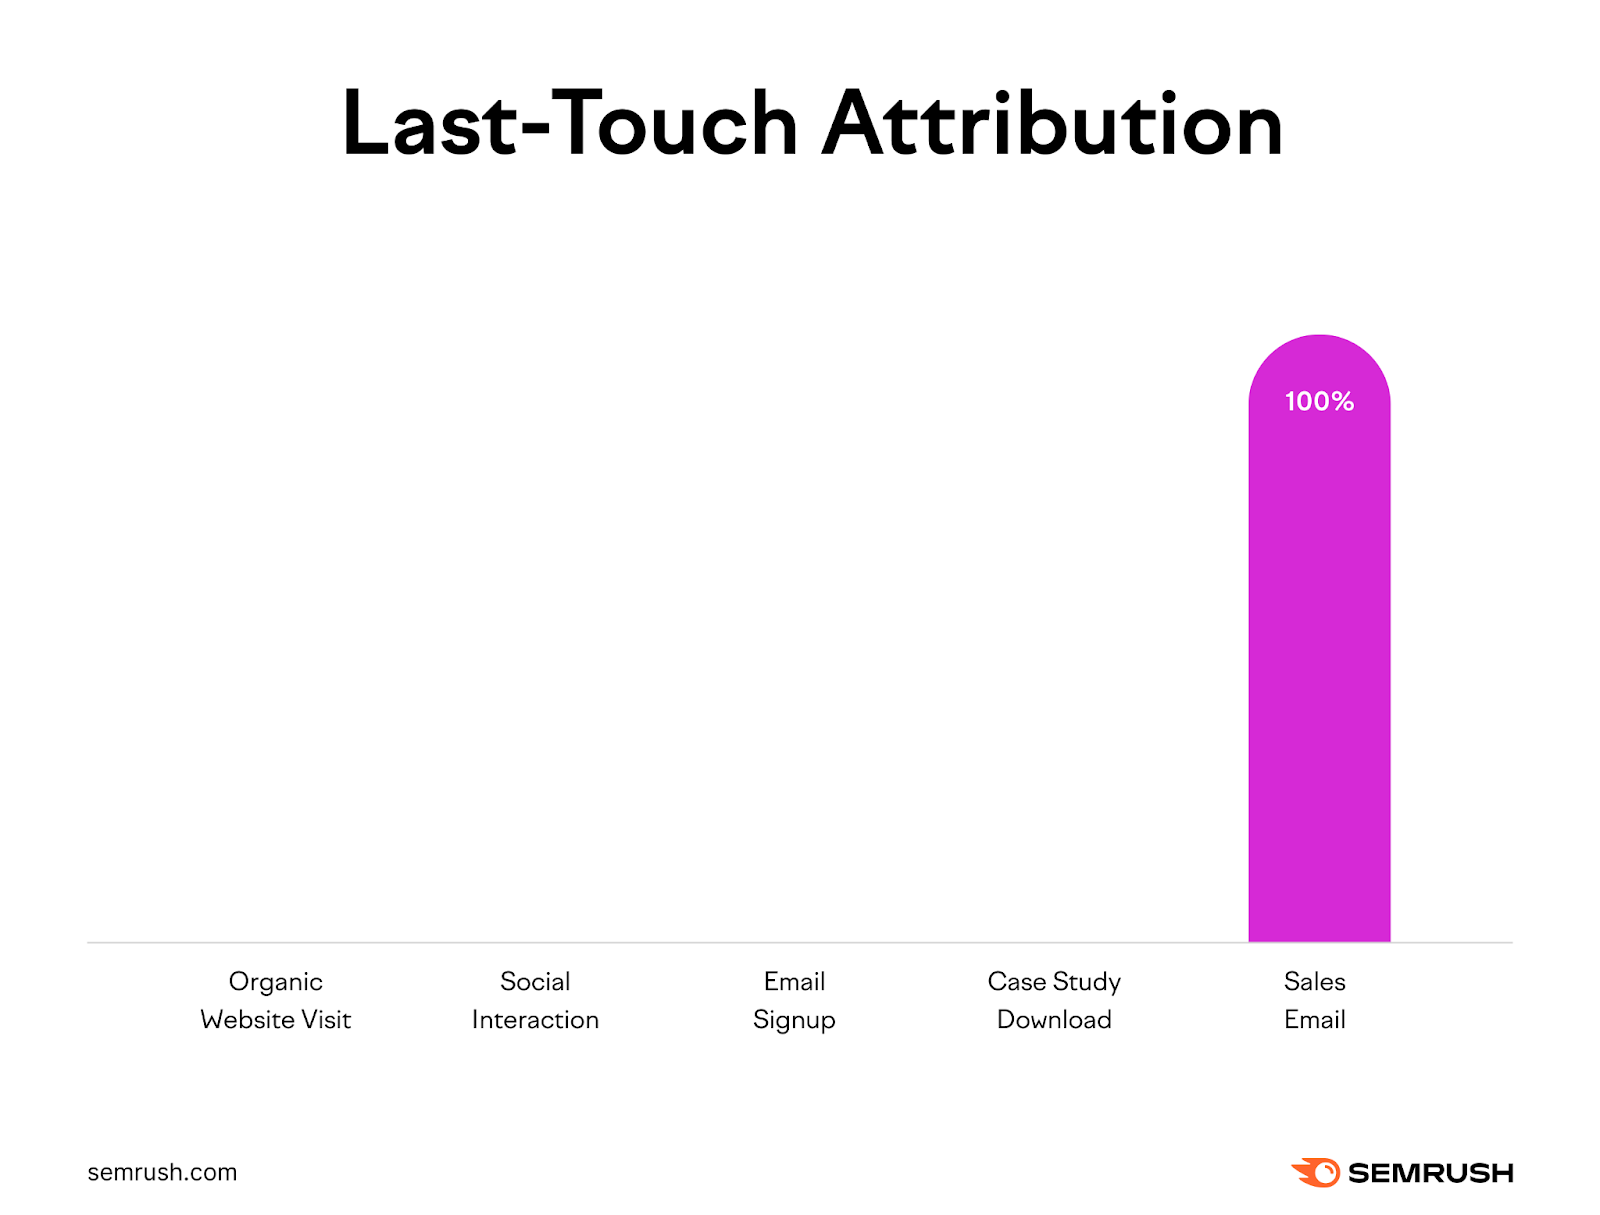 Last-touch attribution assigns all credit to the last touchpoint.